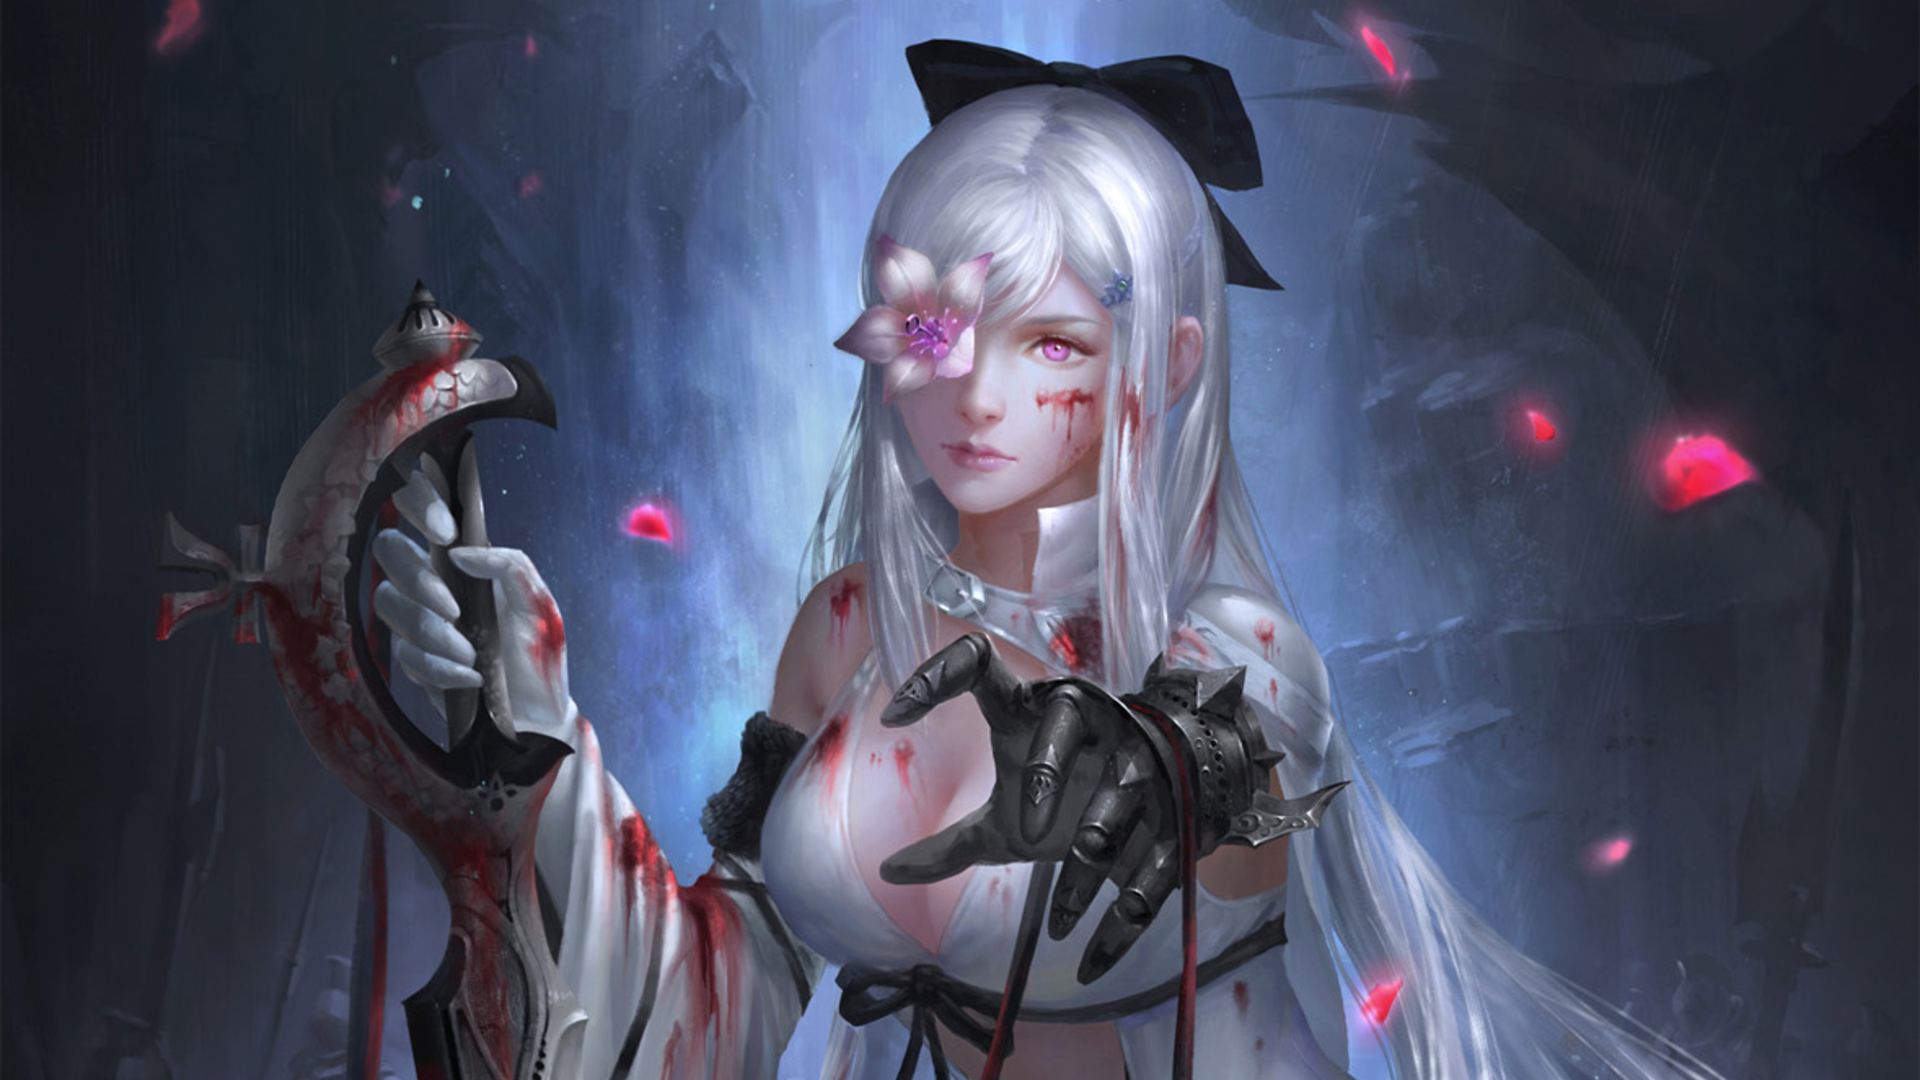 8 Drakengard 3 Hd Wallpapers Background Images Wallpaper Abyss